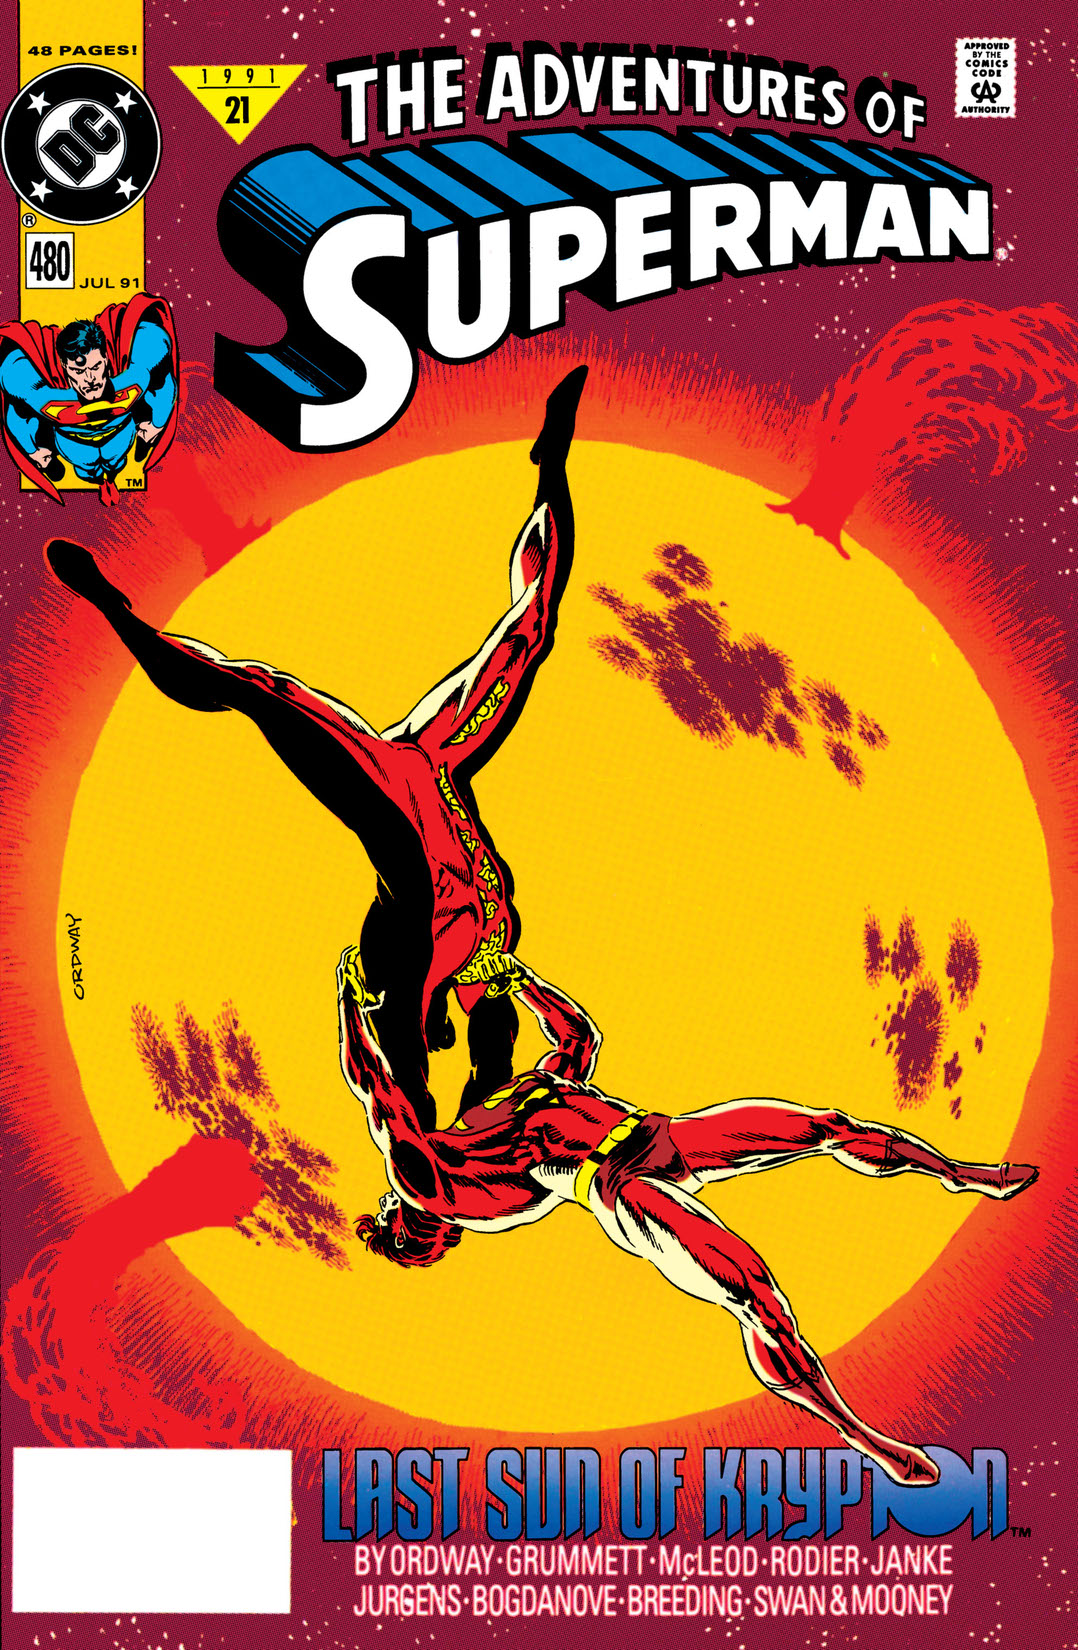 Adventures of Superman (1987-) #480 preview images